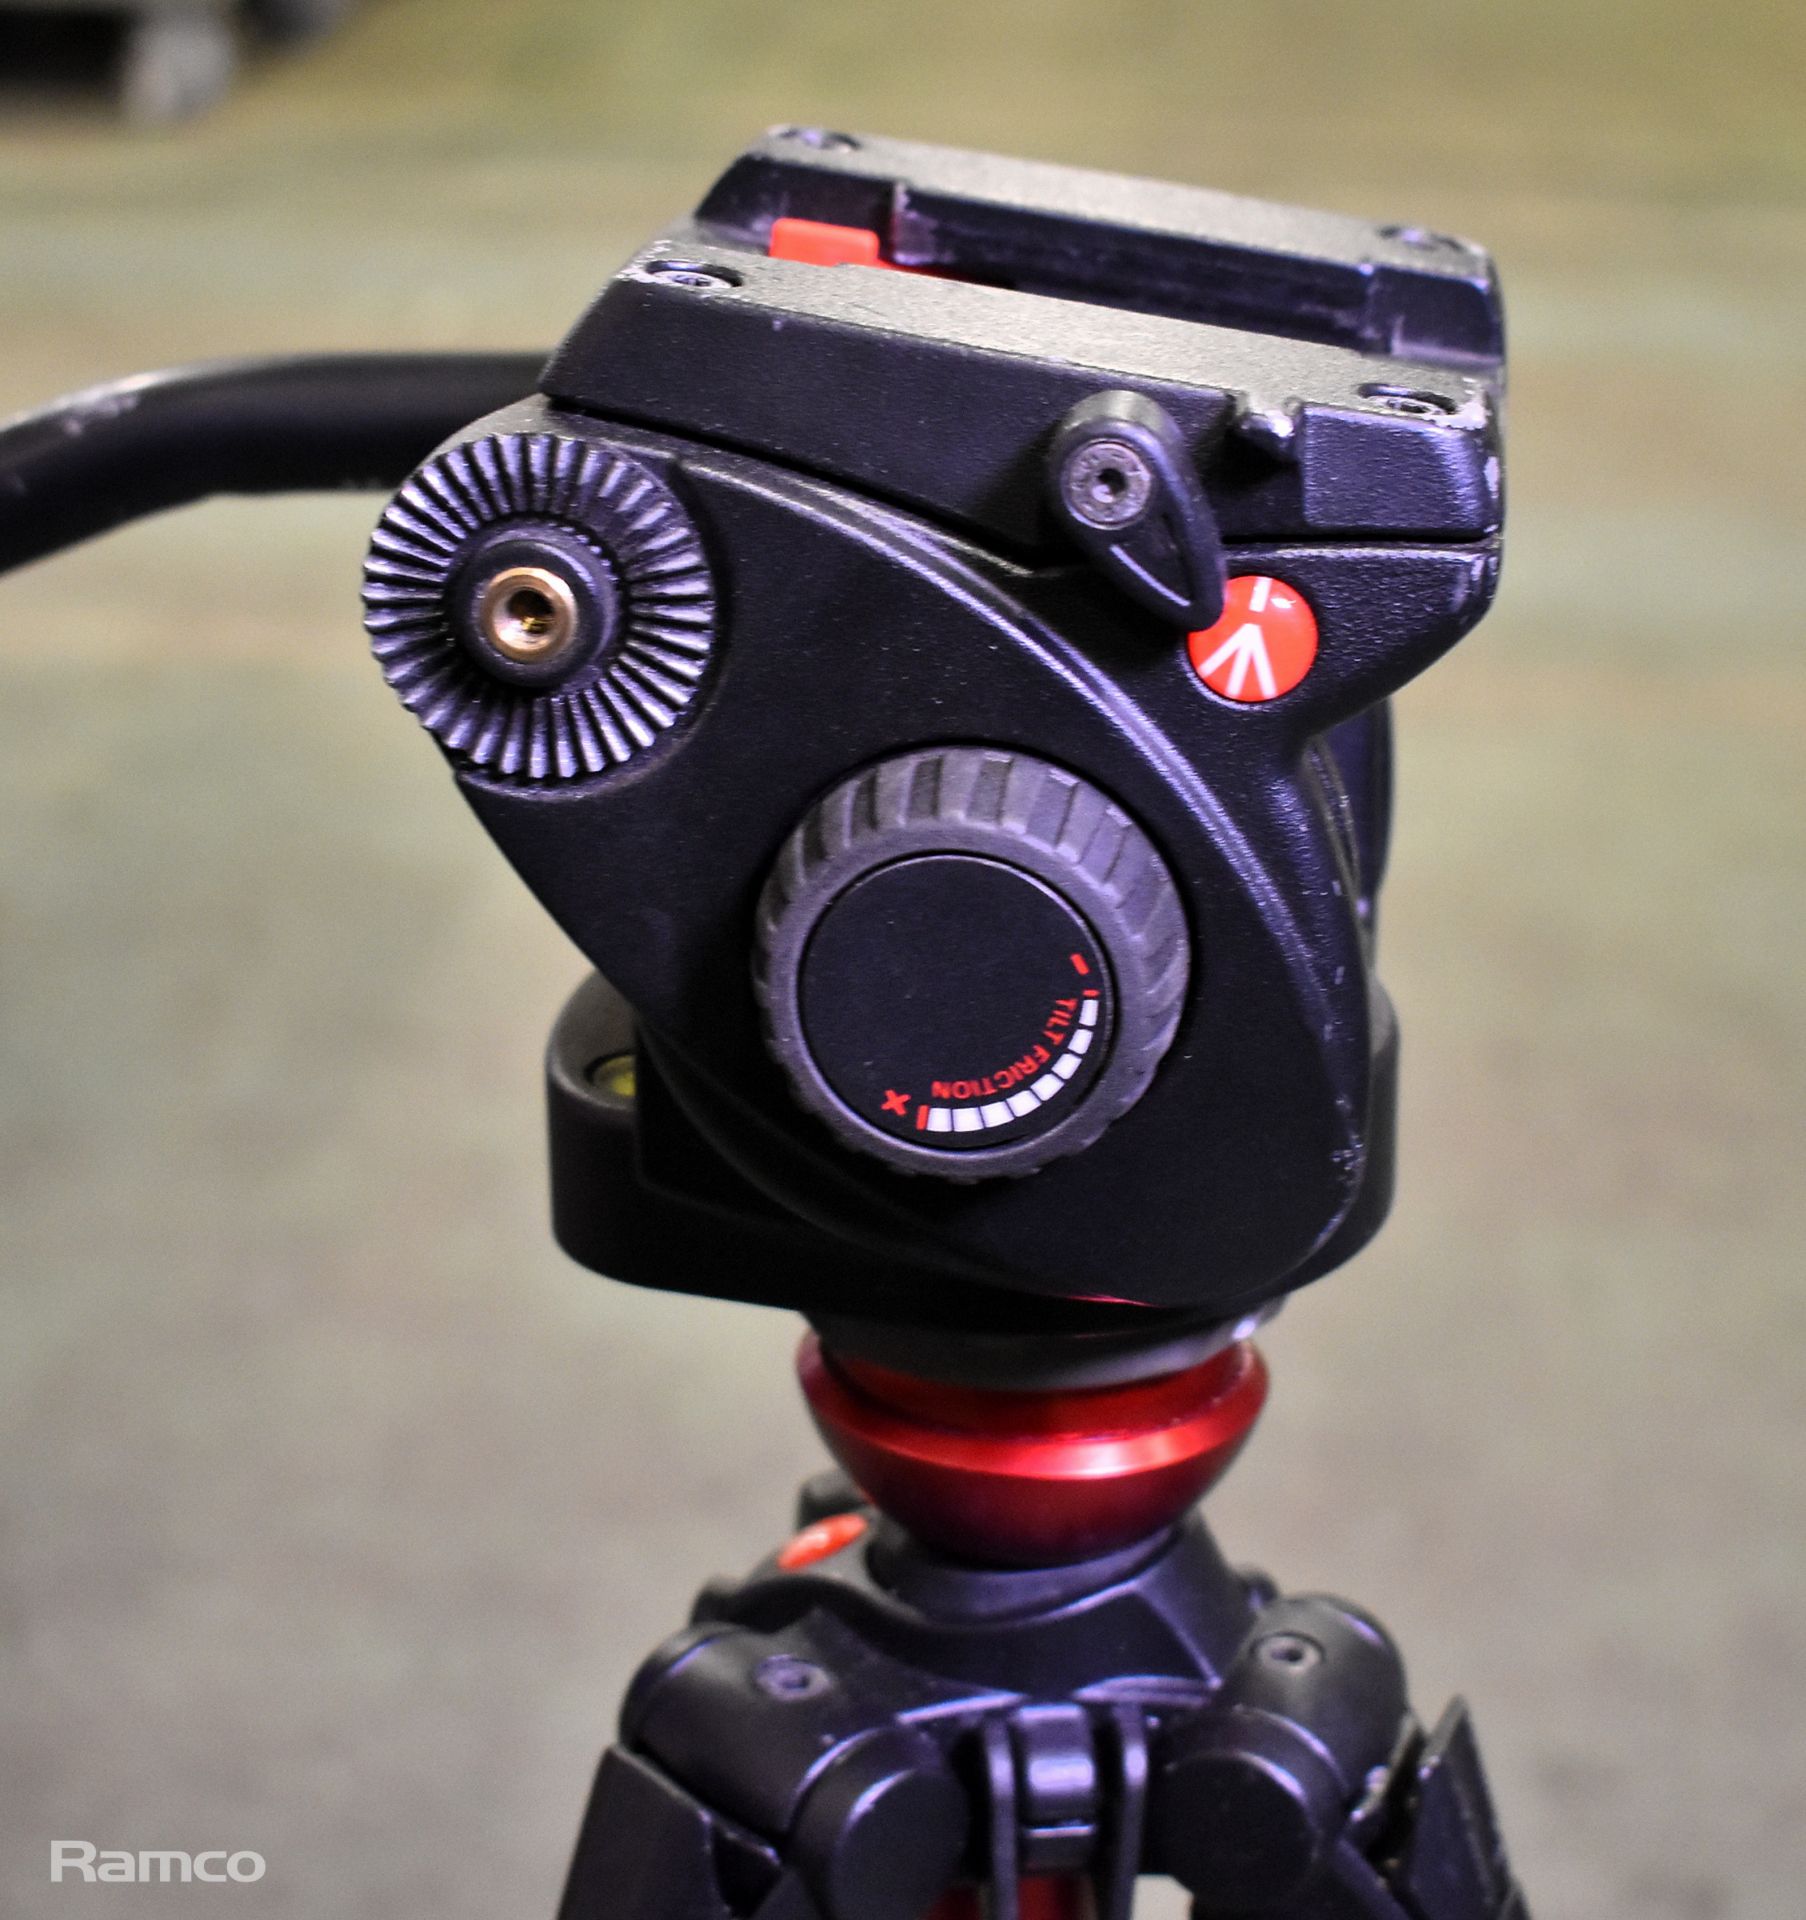 Manfrotto 501HDV head unit on a 745XB tripod with carry case - Image 6 of 8